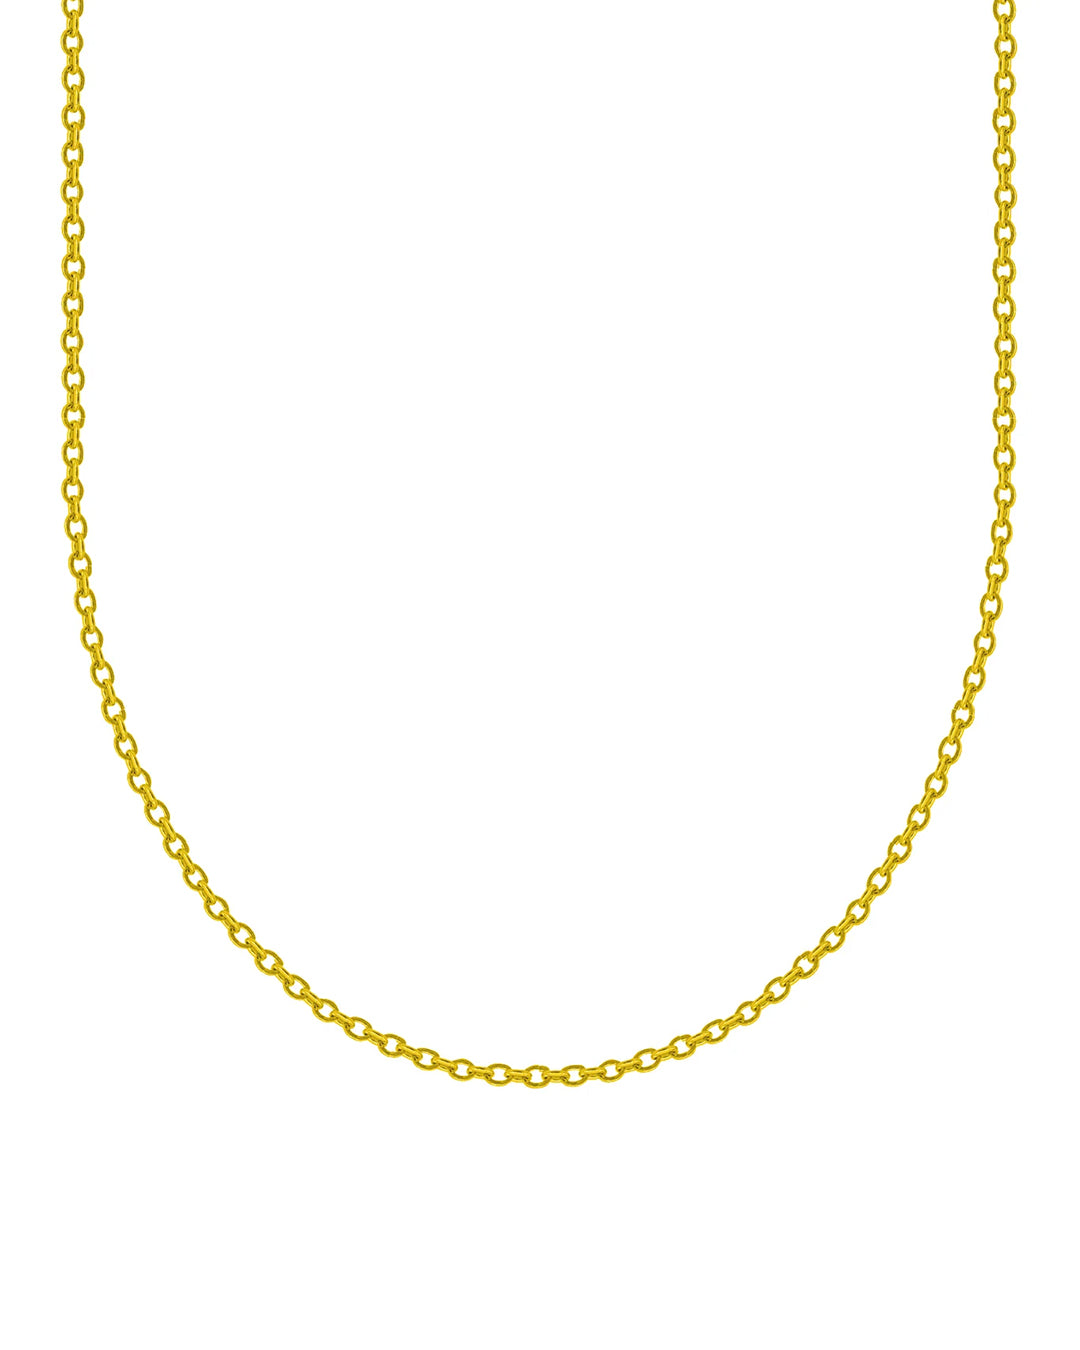 Thin Oval Kette 2mm (Gold)